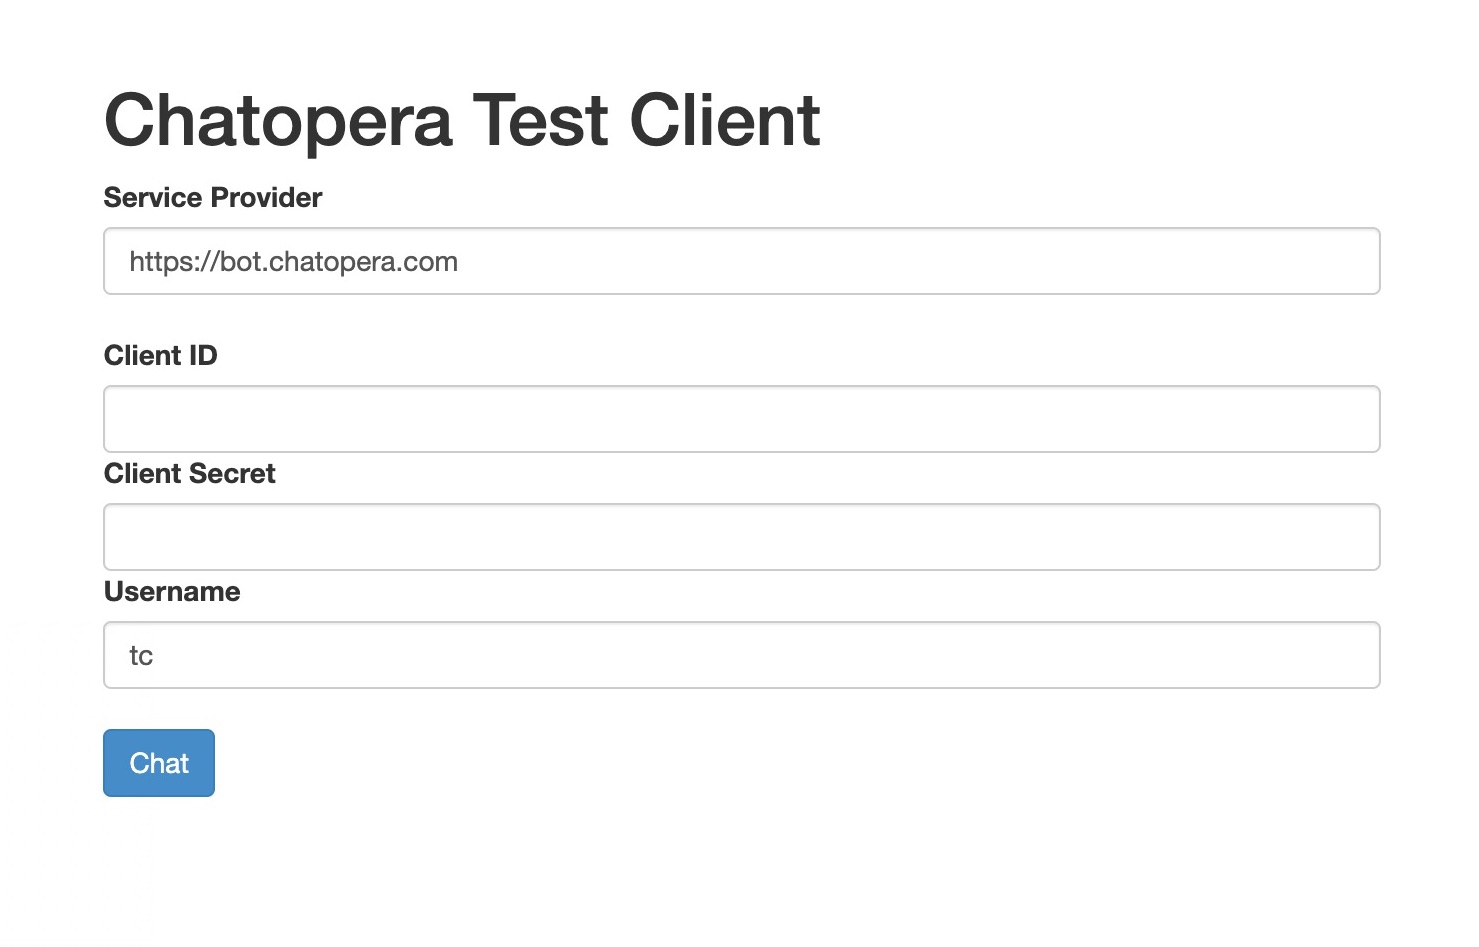 Chatopera Test Client